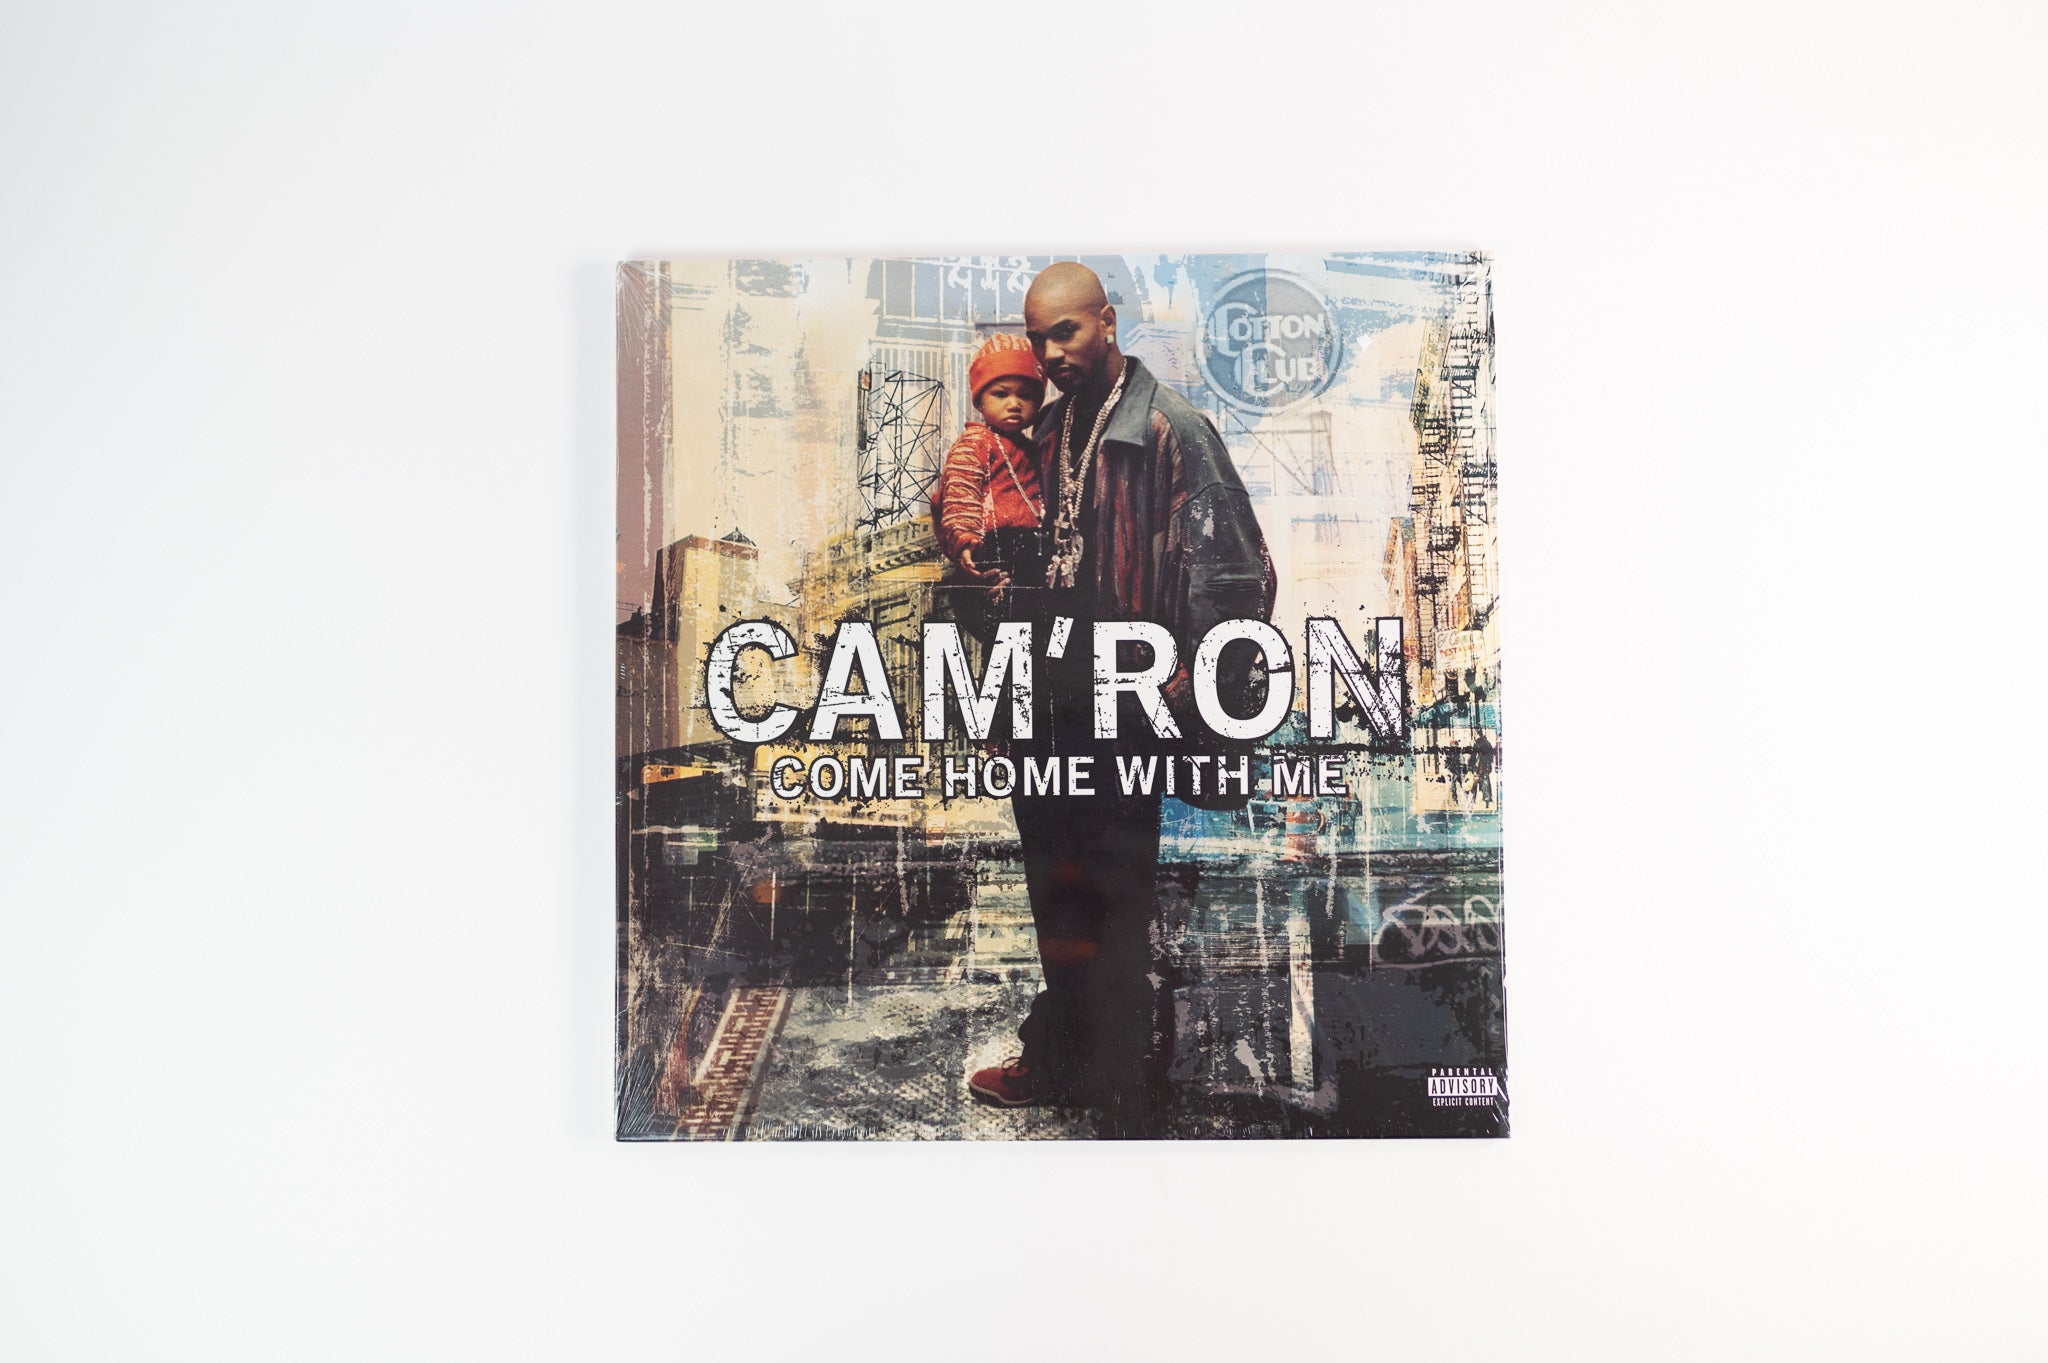 Cam'ron - Come Home With Me on Roc-A-Fella Sealed